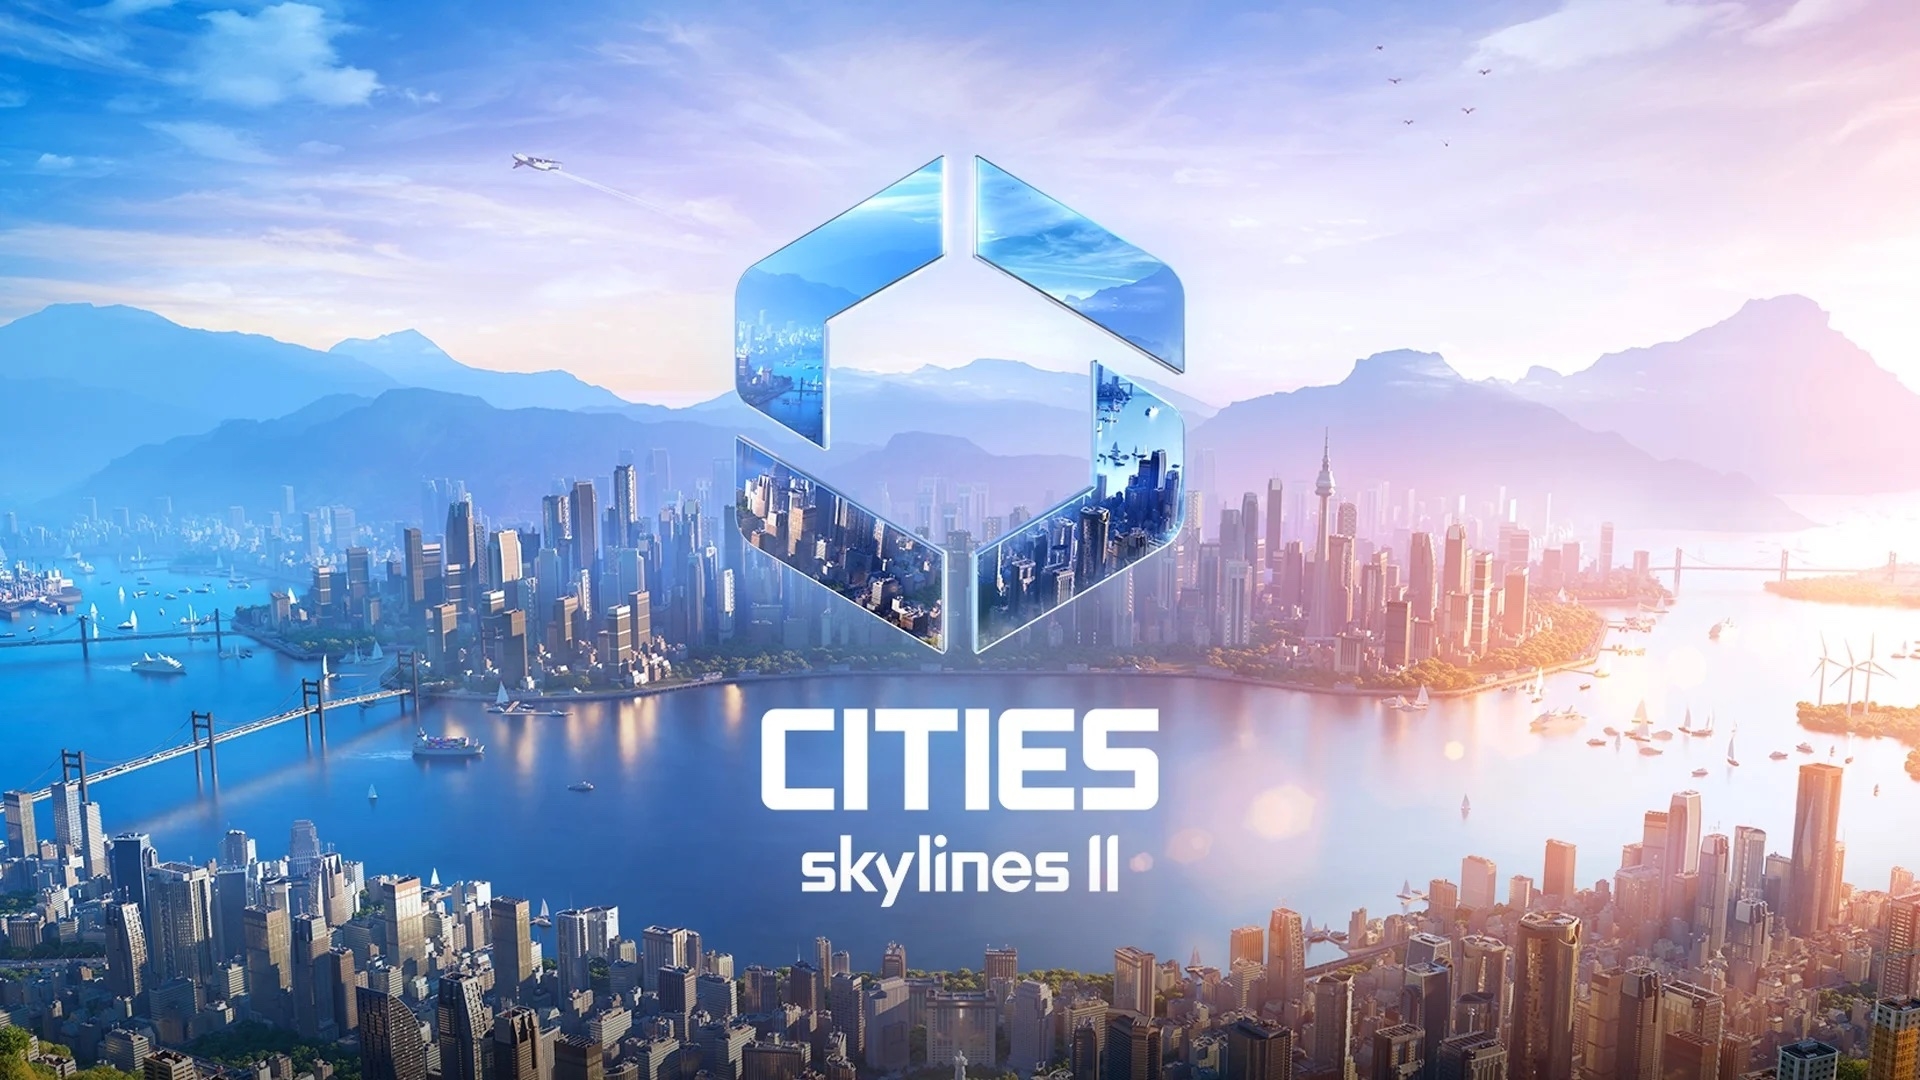 Cities: Skylines 2 announced for PC, PS5 & Xbox Series X